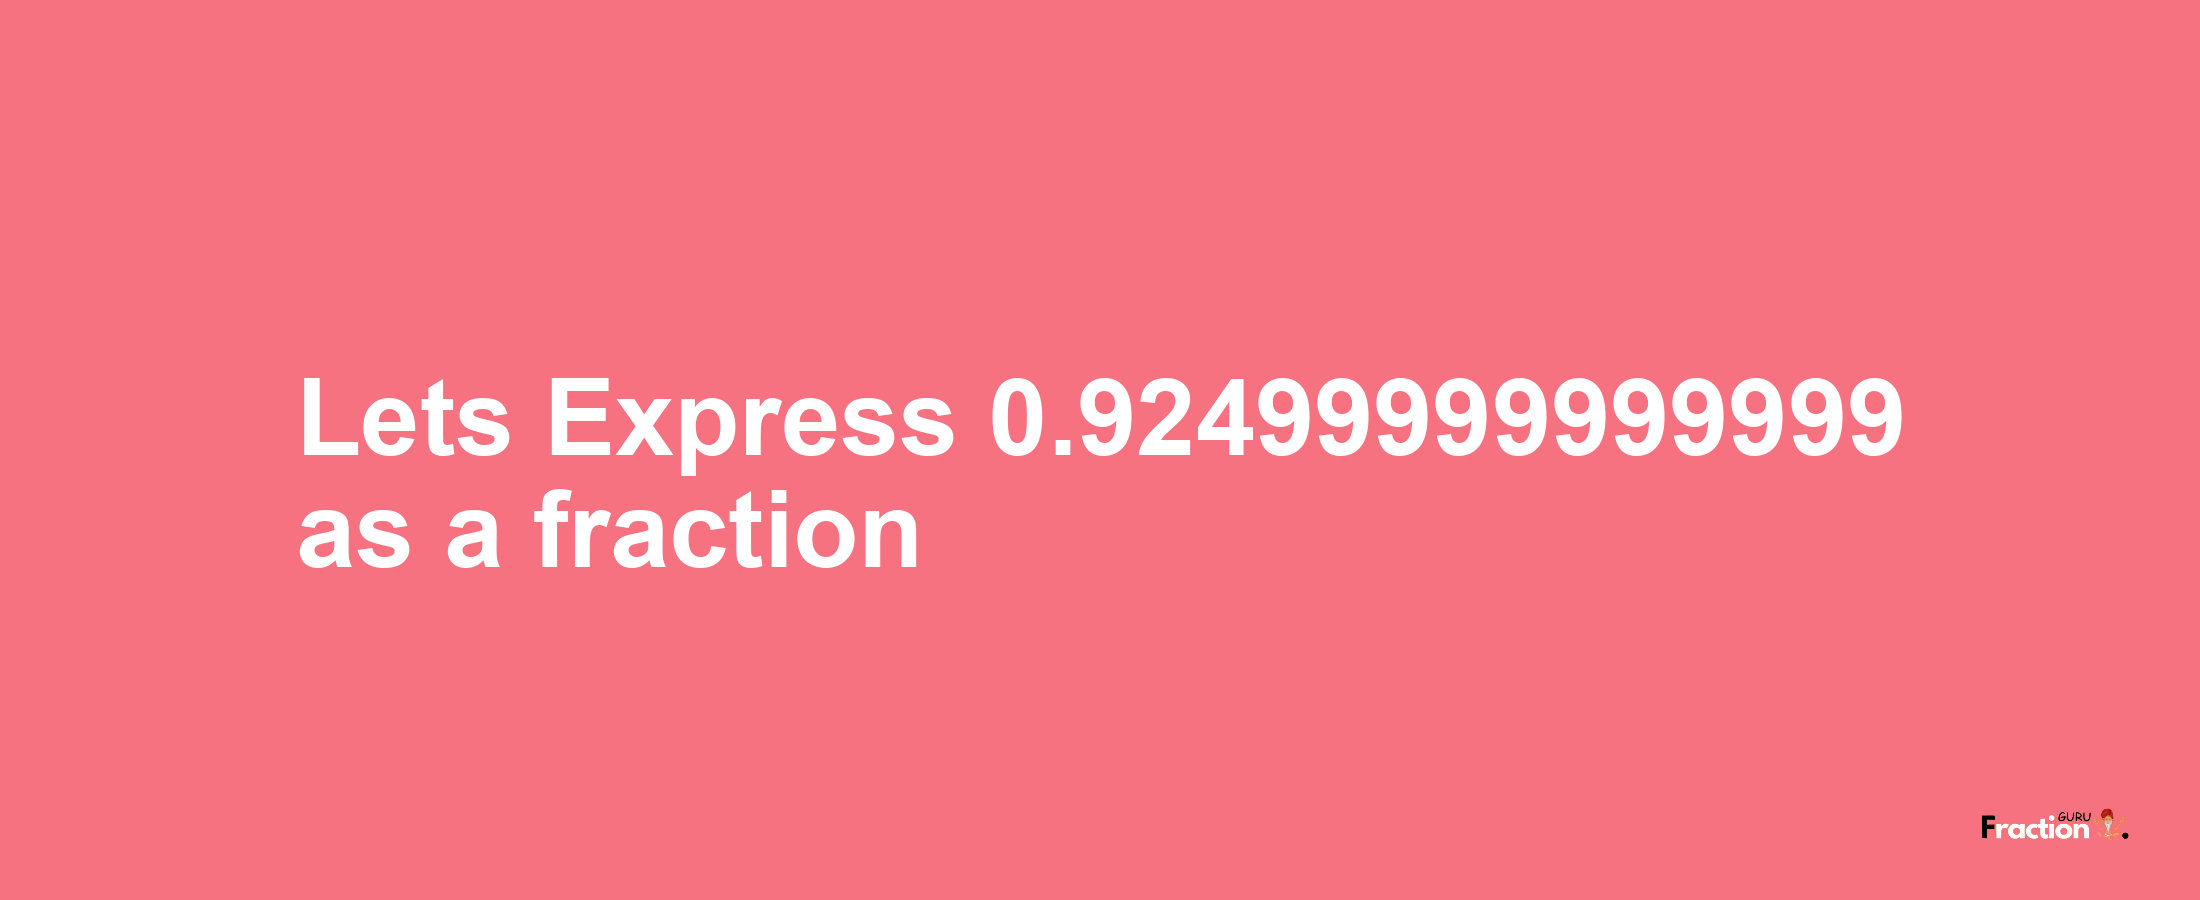 Lets Express 0.92499999999999 as afraction